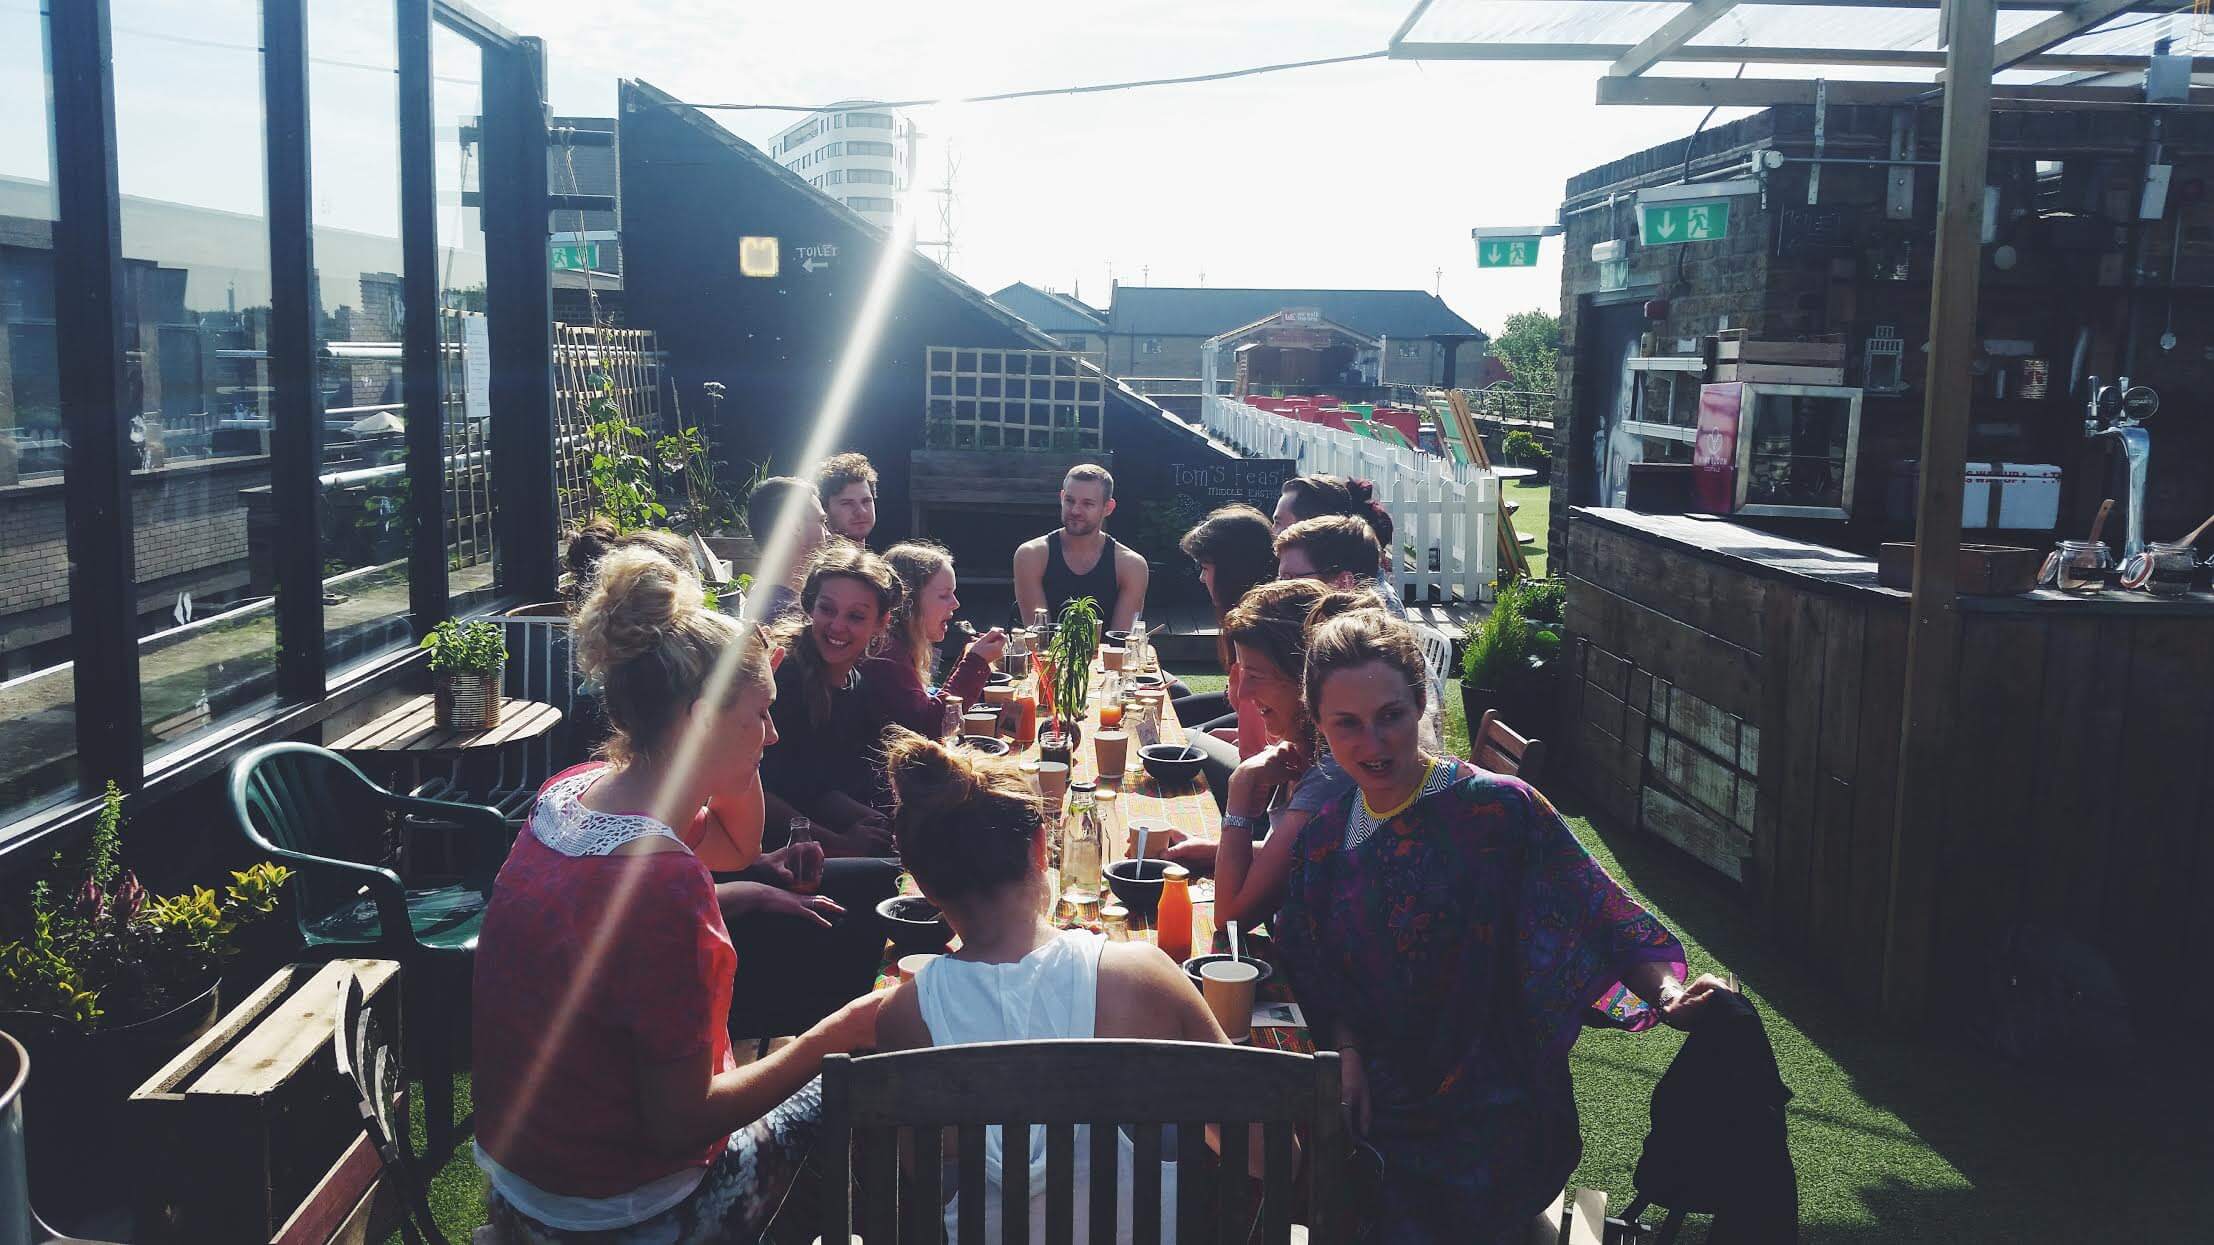 A rooftop bar in Hoxton, by the railway. Atop it is wooden furniture, a play area for children, and a long table with friends gathered about.